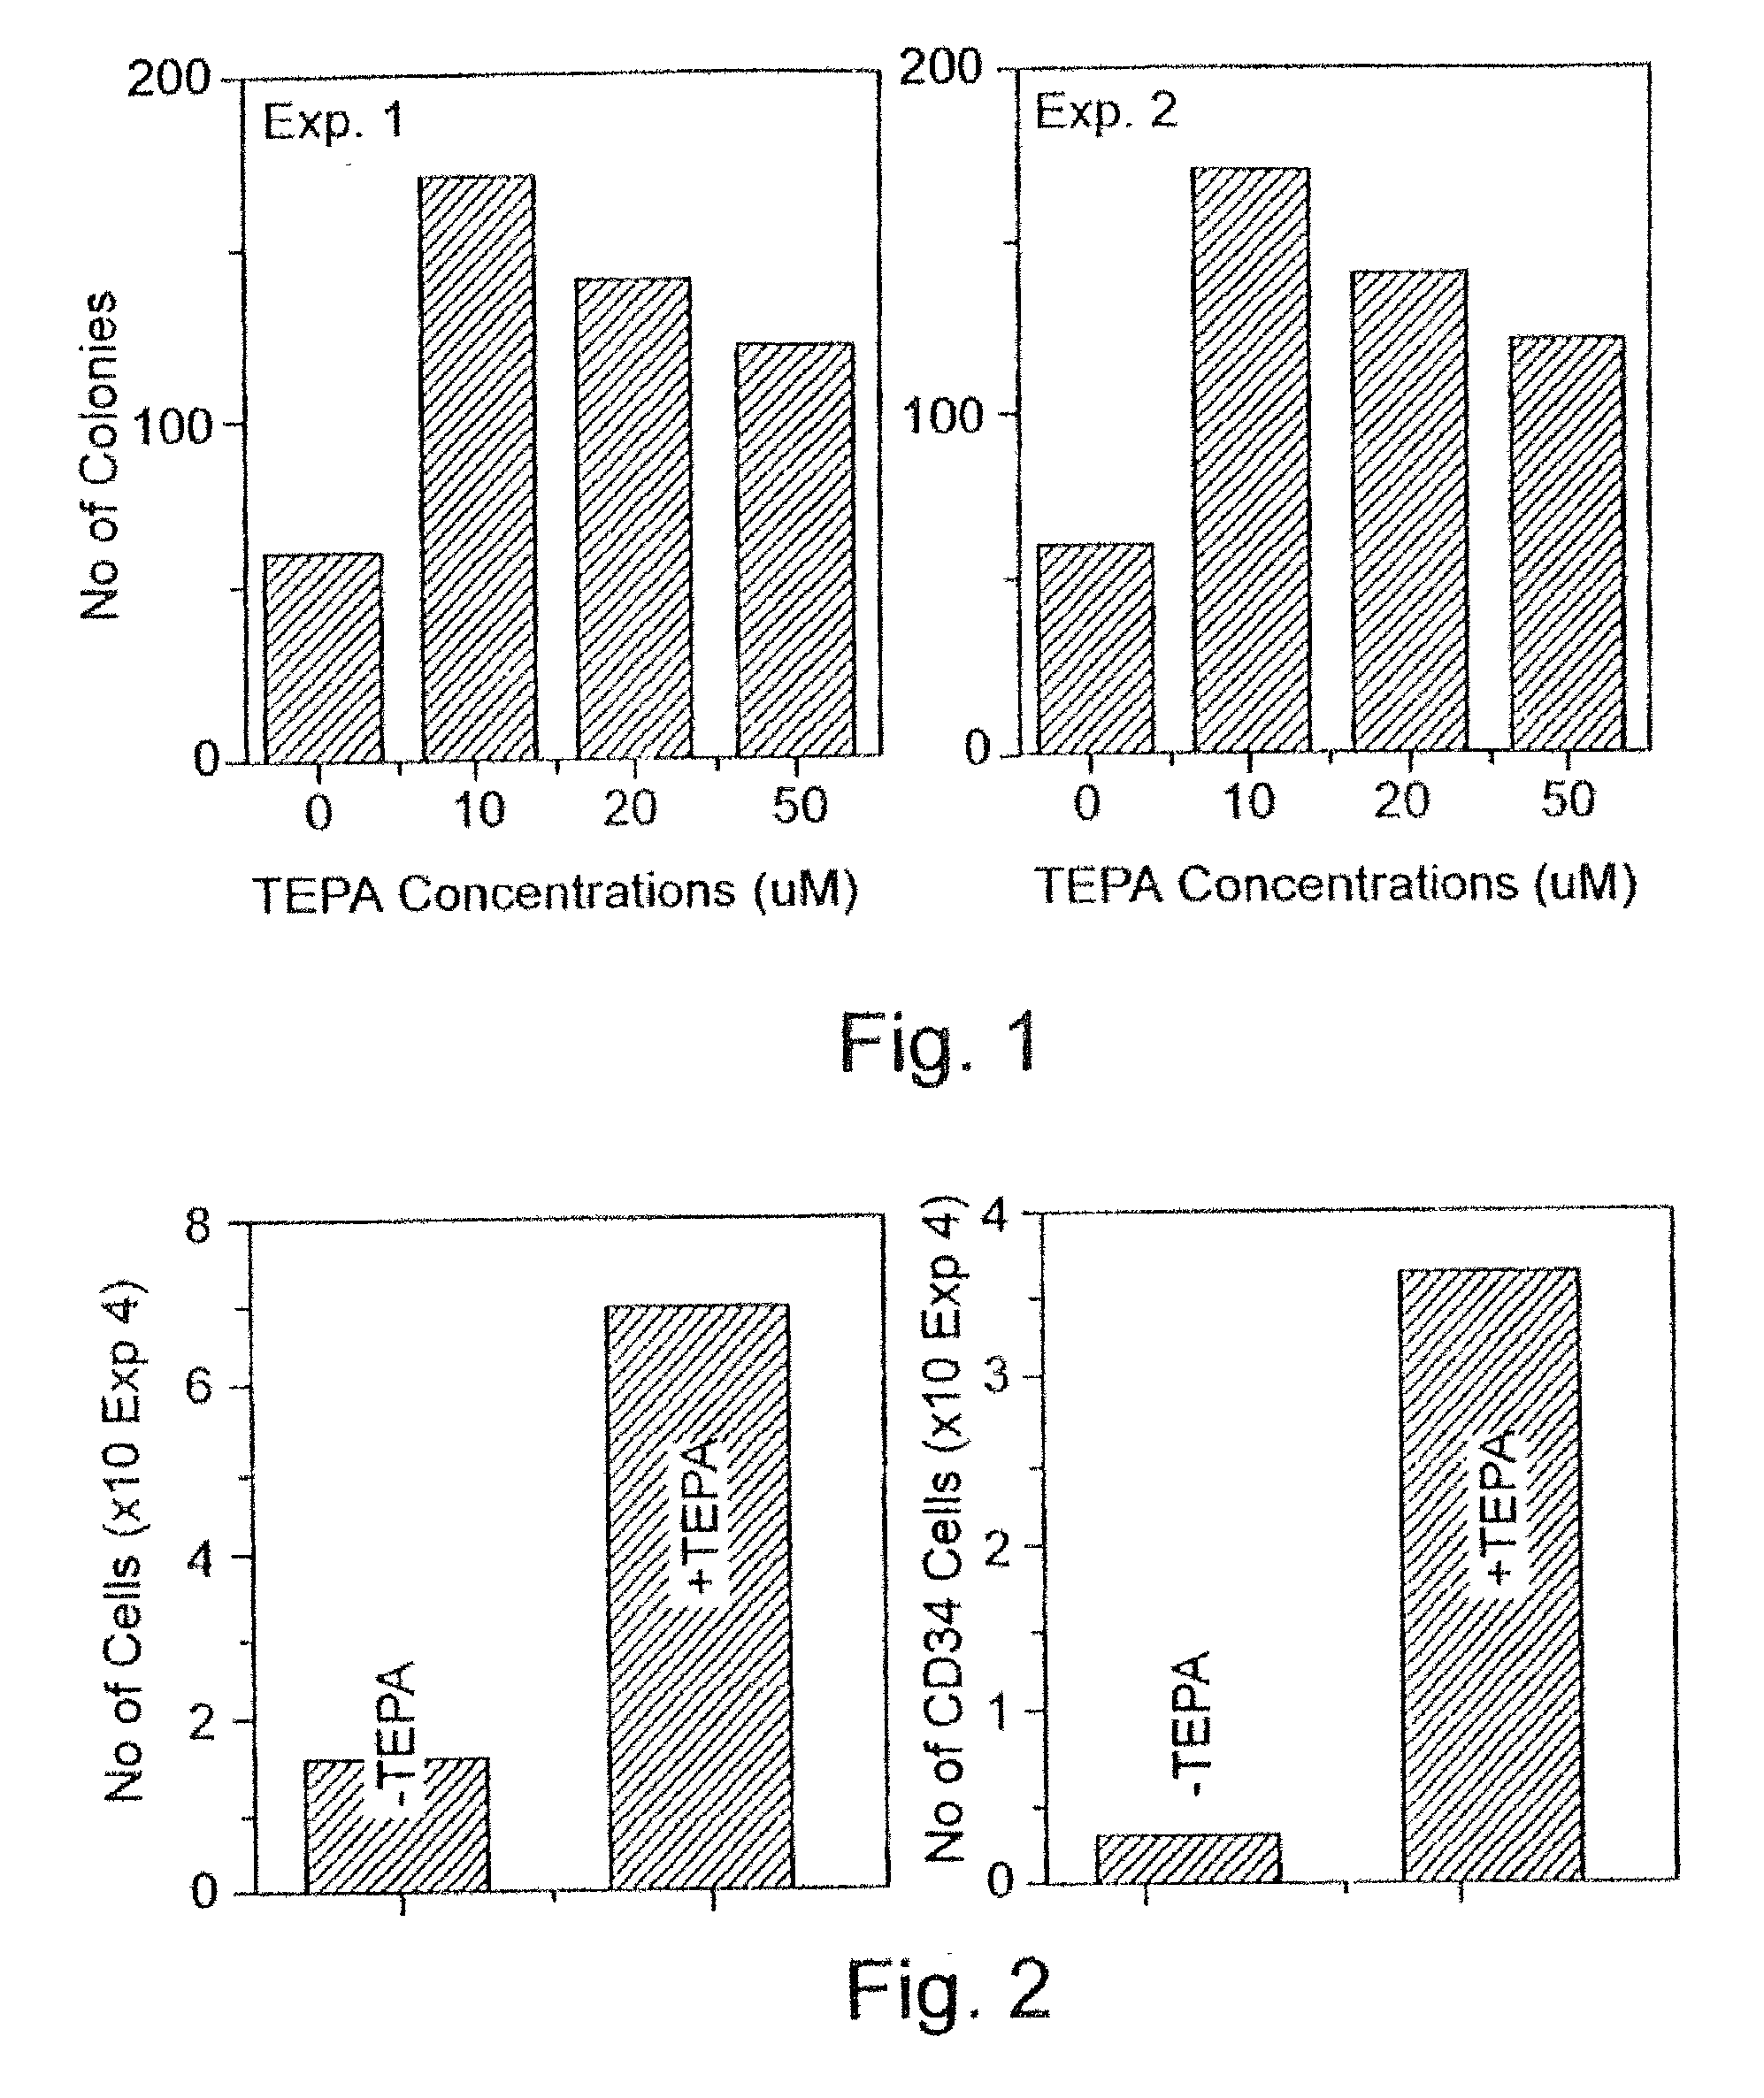 Methods of controlling proliferation and differentiation of stem and progenitor cells